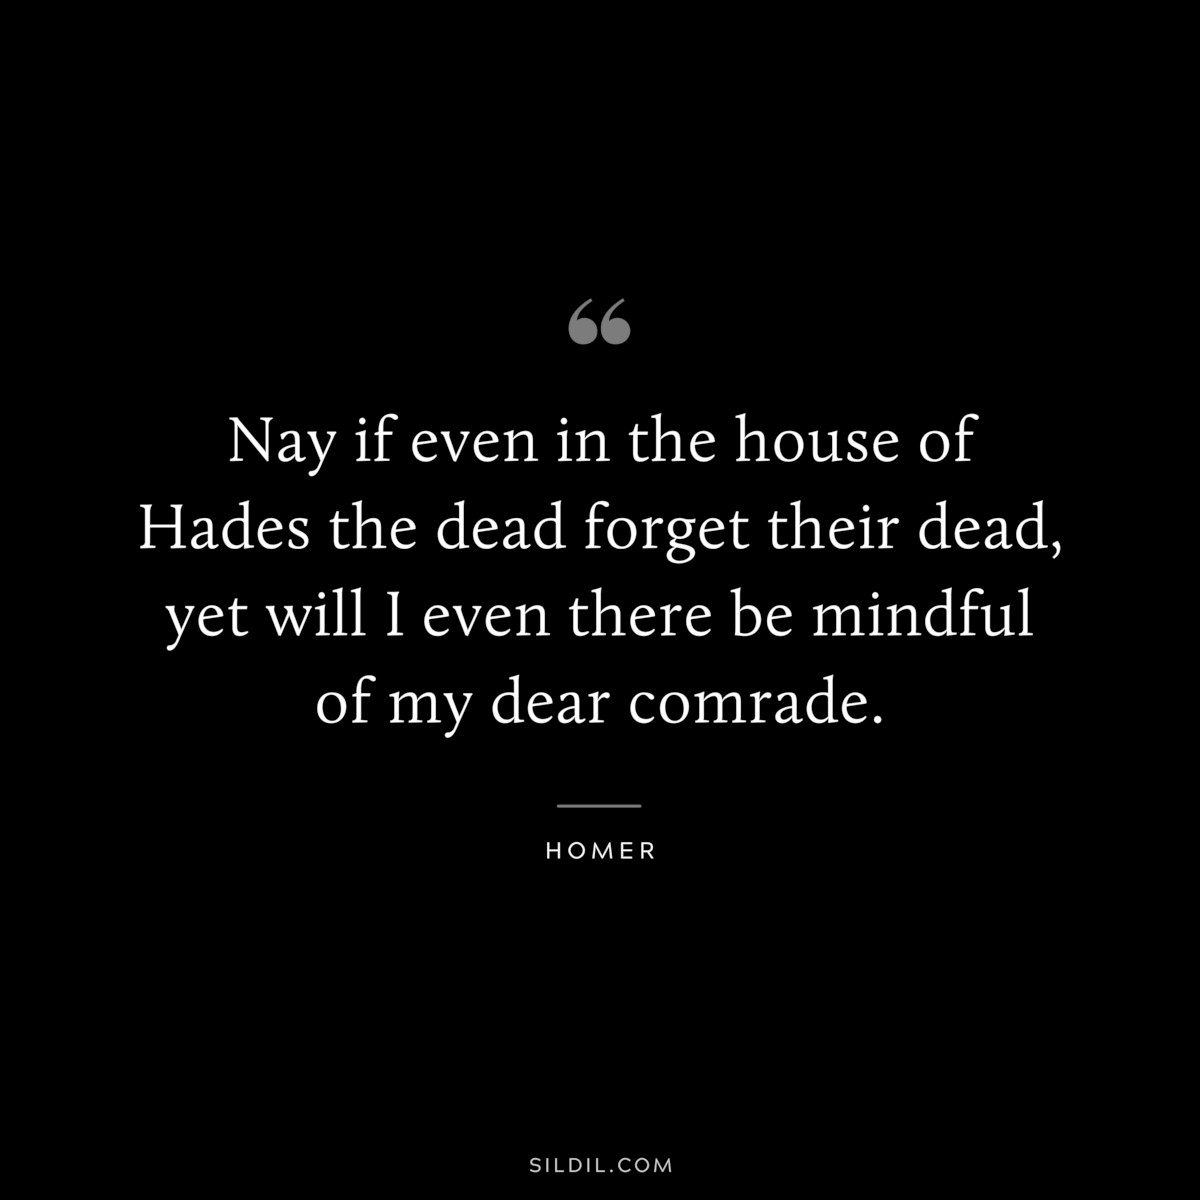 Nay if even in the house of Hades the dead forget their dead, yet will I even there be mindful of my dear comrade. ― Homer